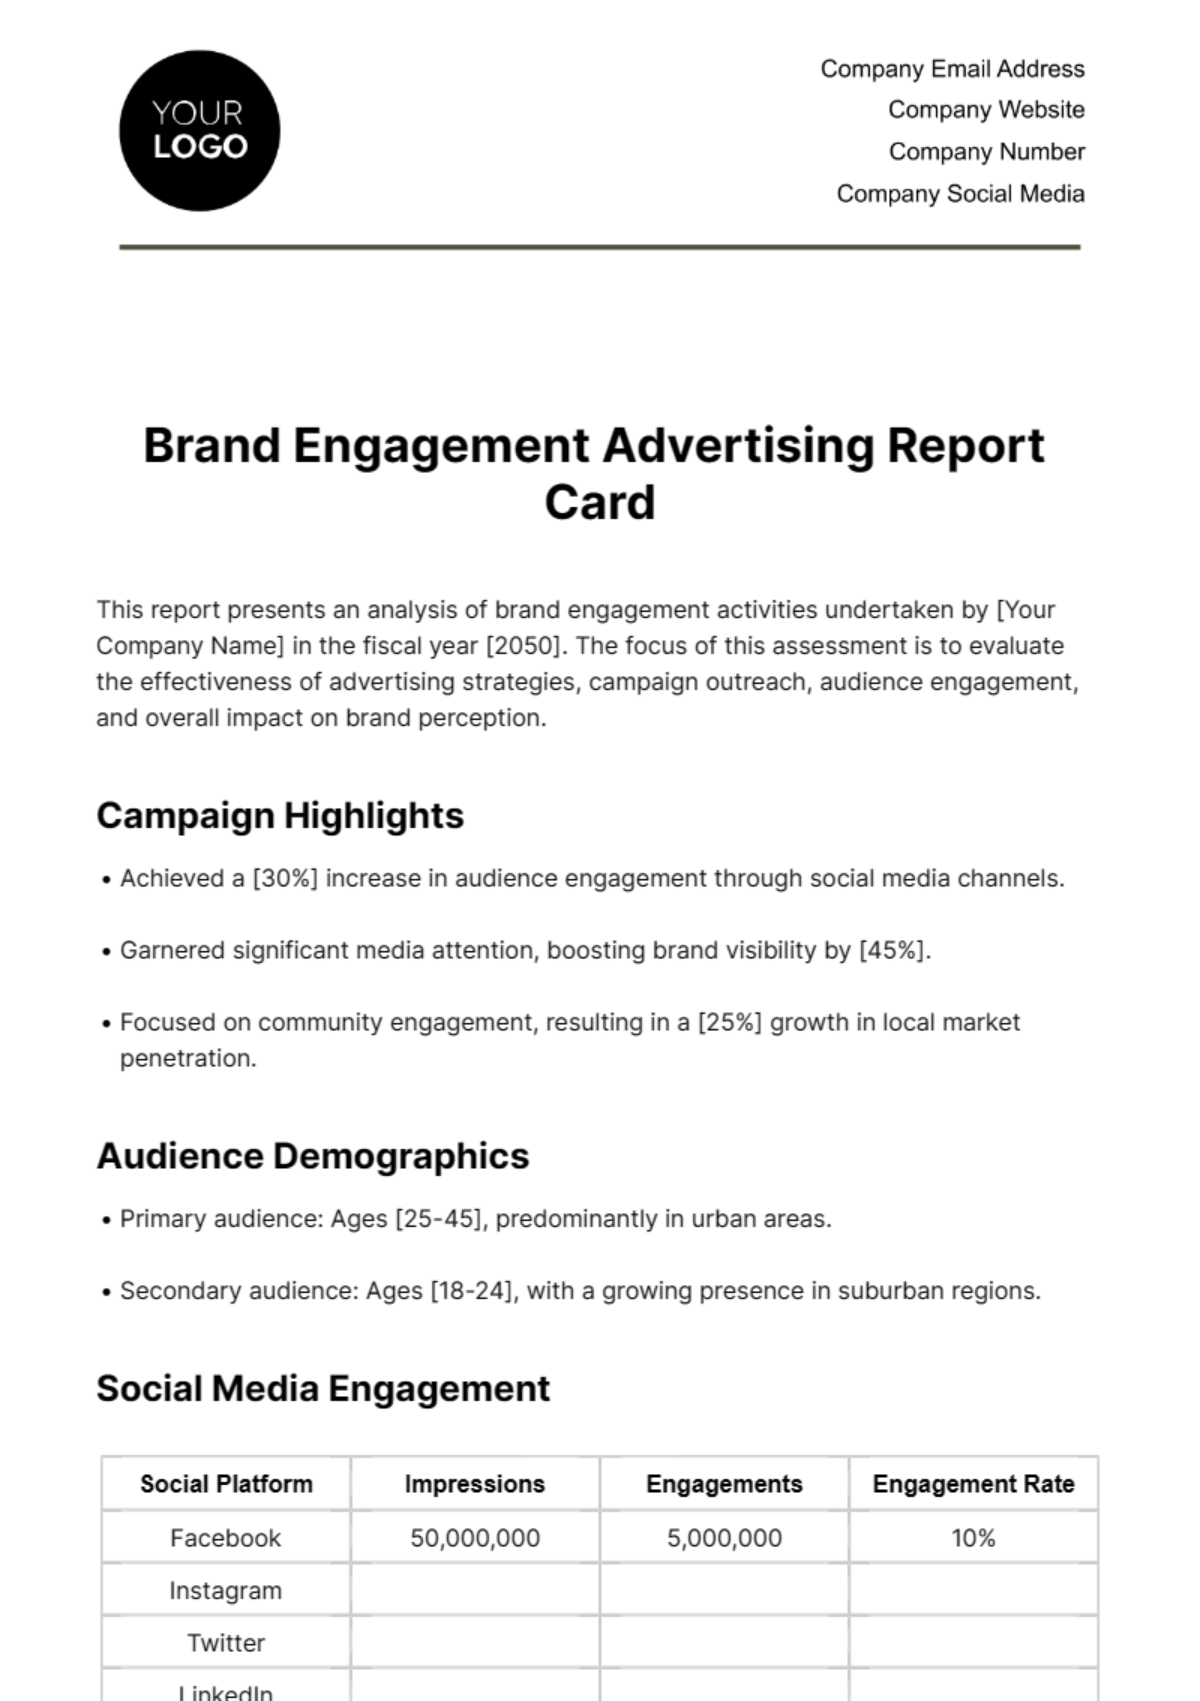 Free Brand Engagement Advertising Report Card Template